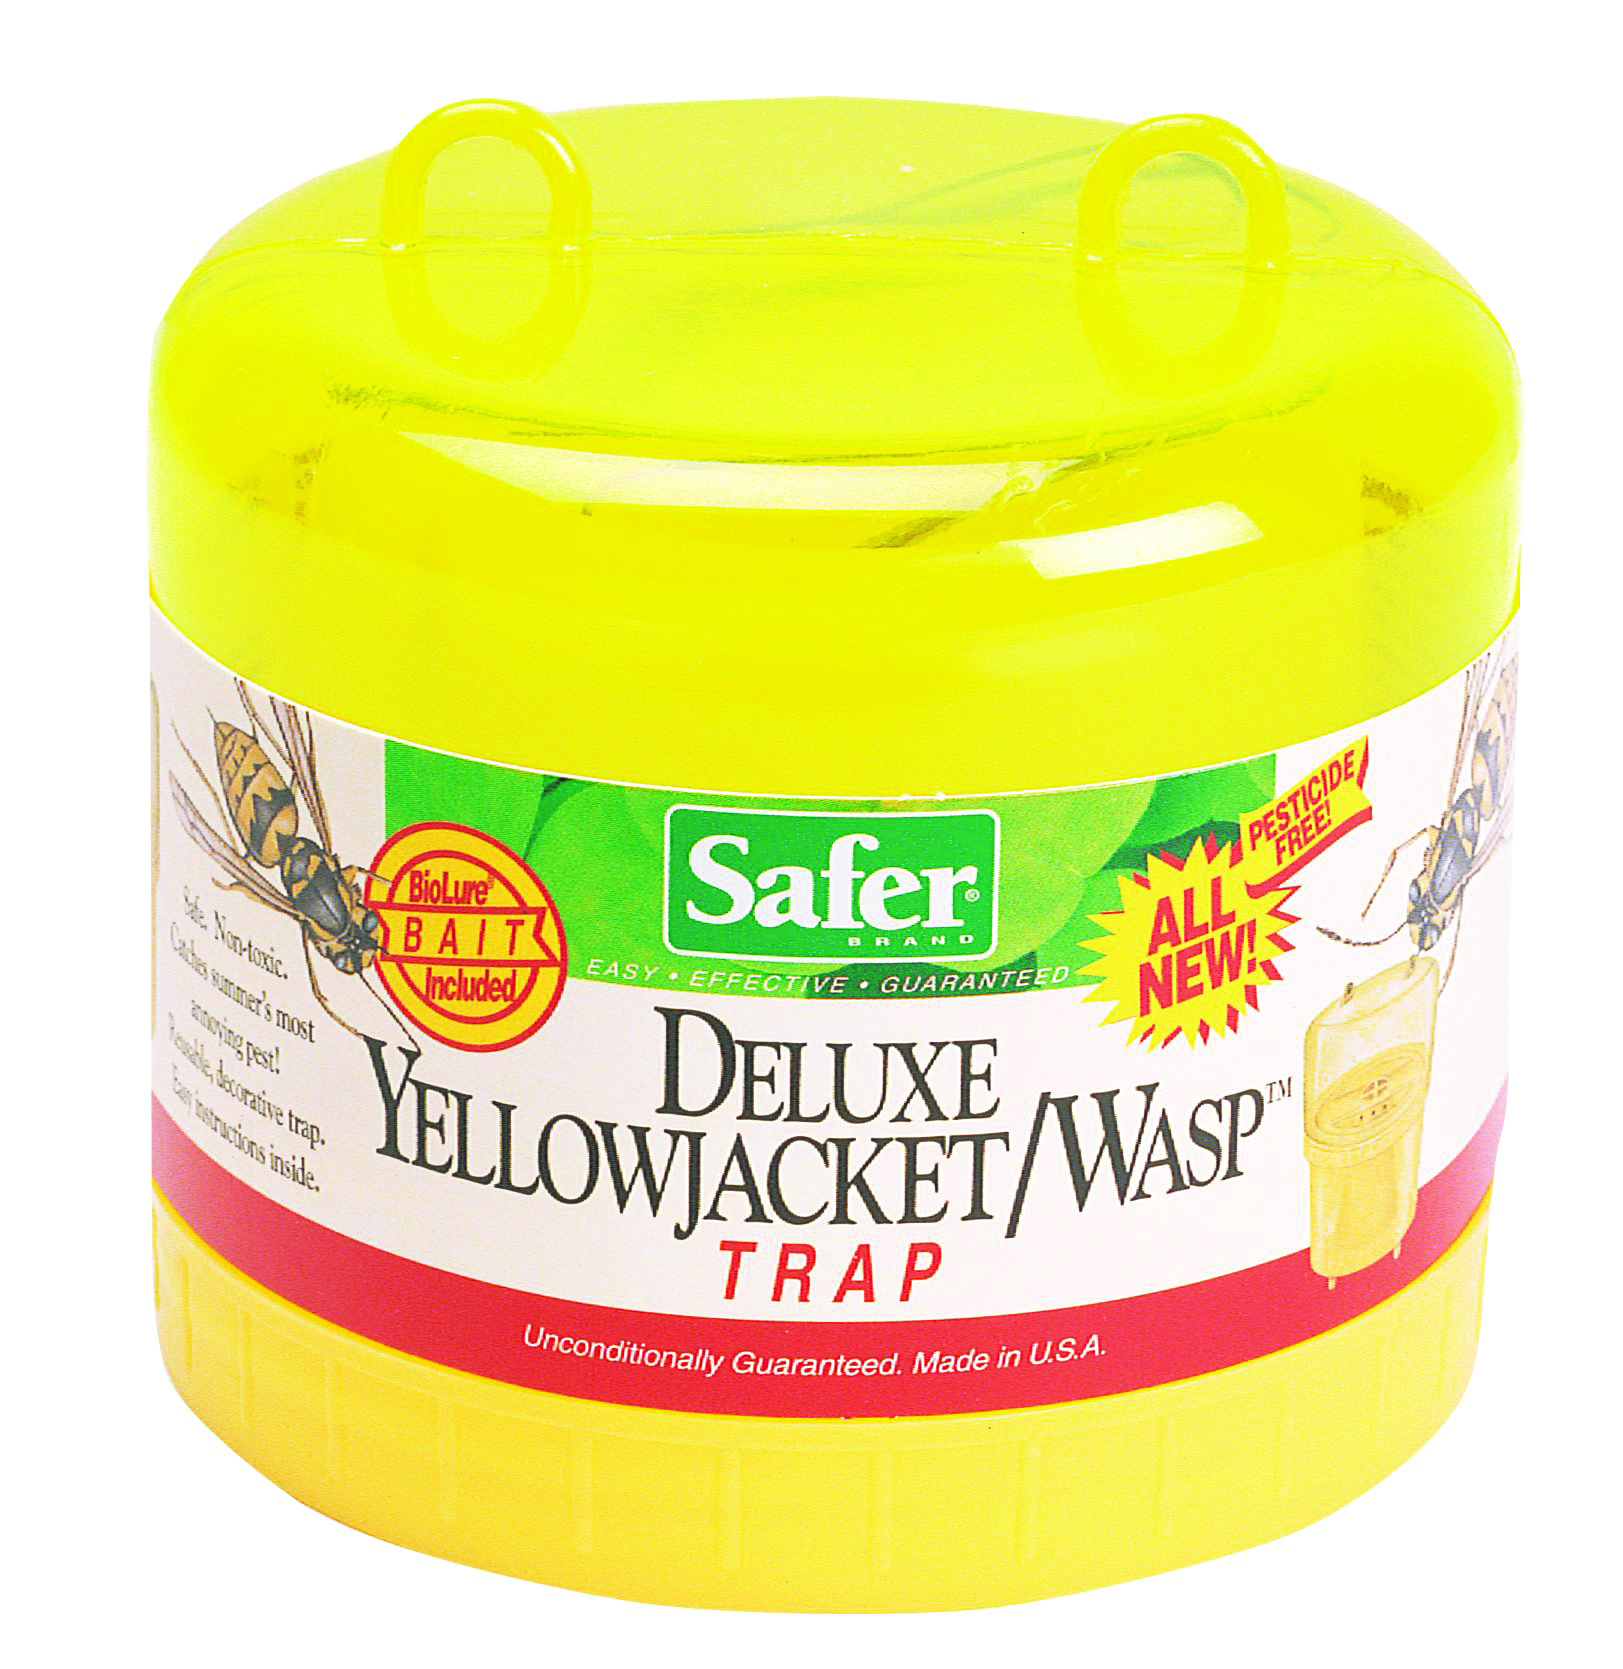 Safer Deluxe Yellow Jacket/Wasp Trap.